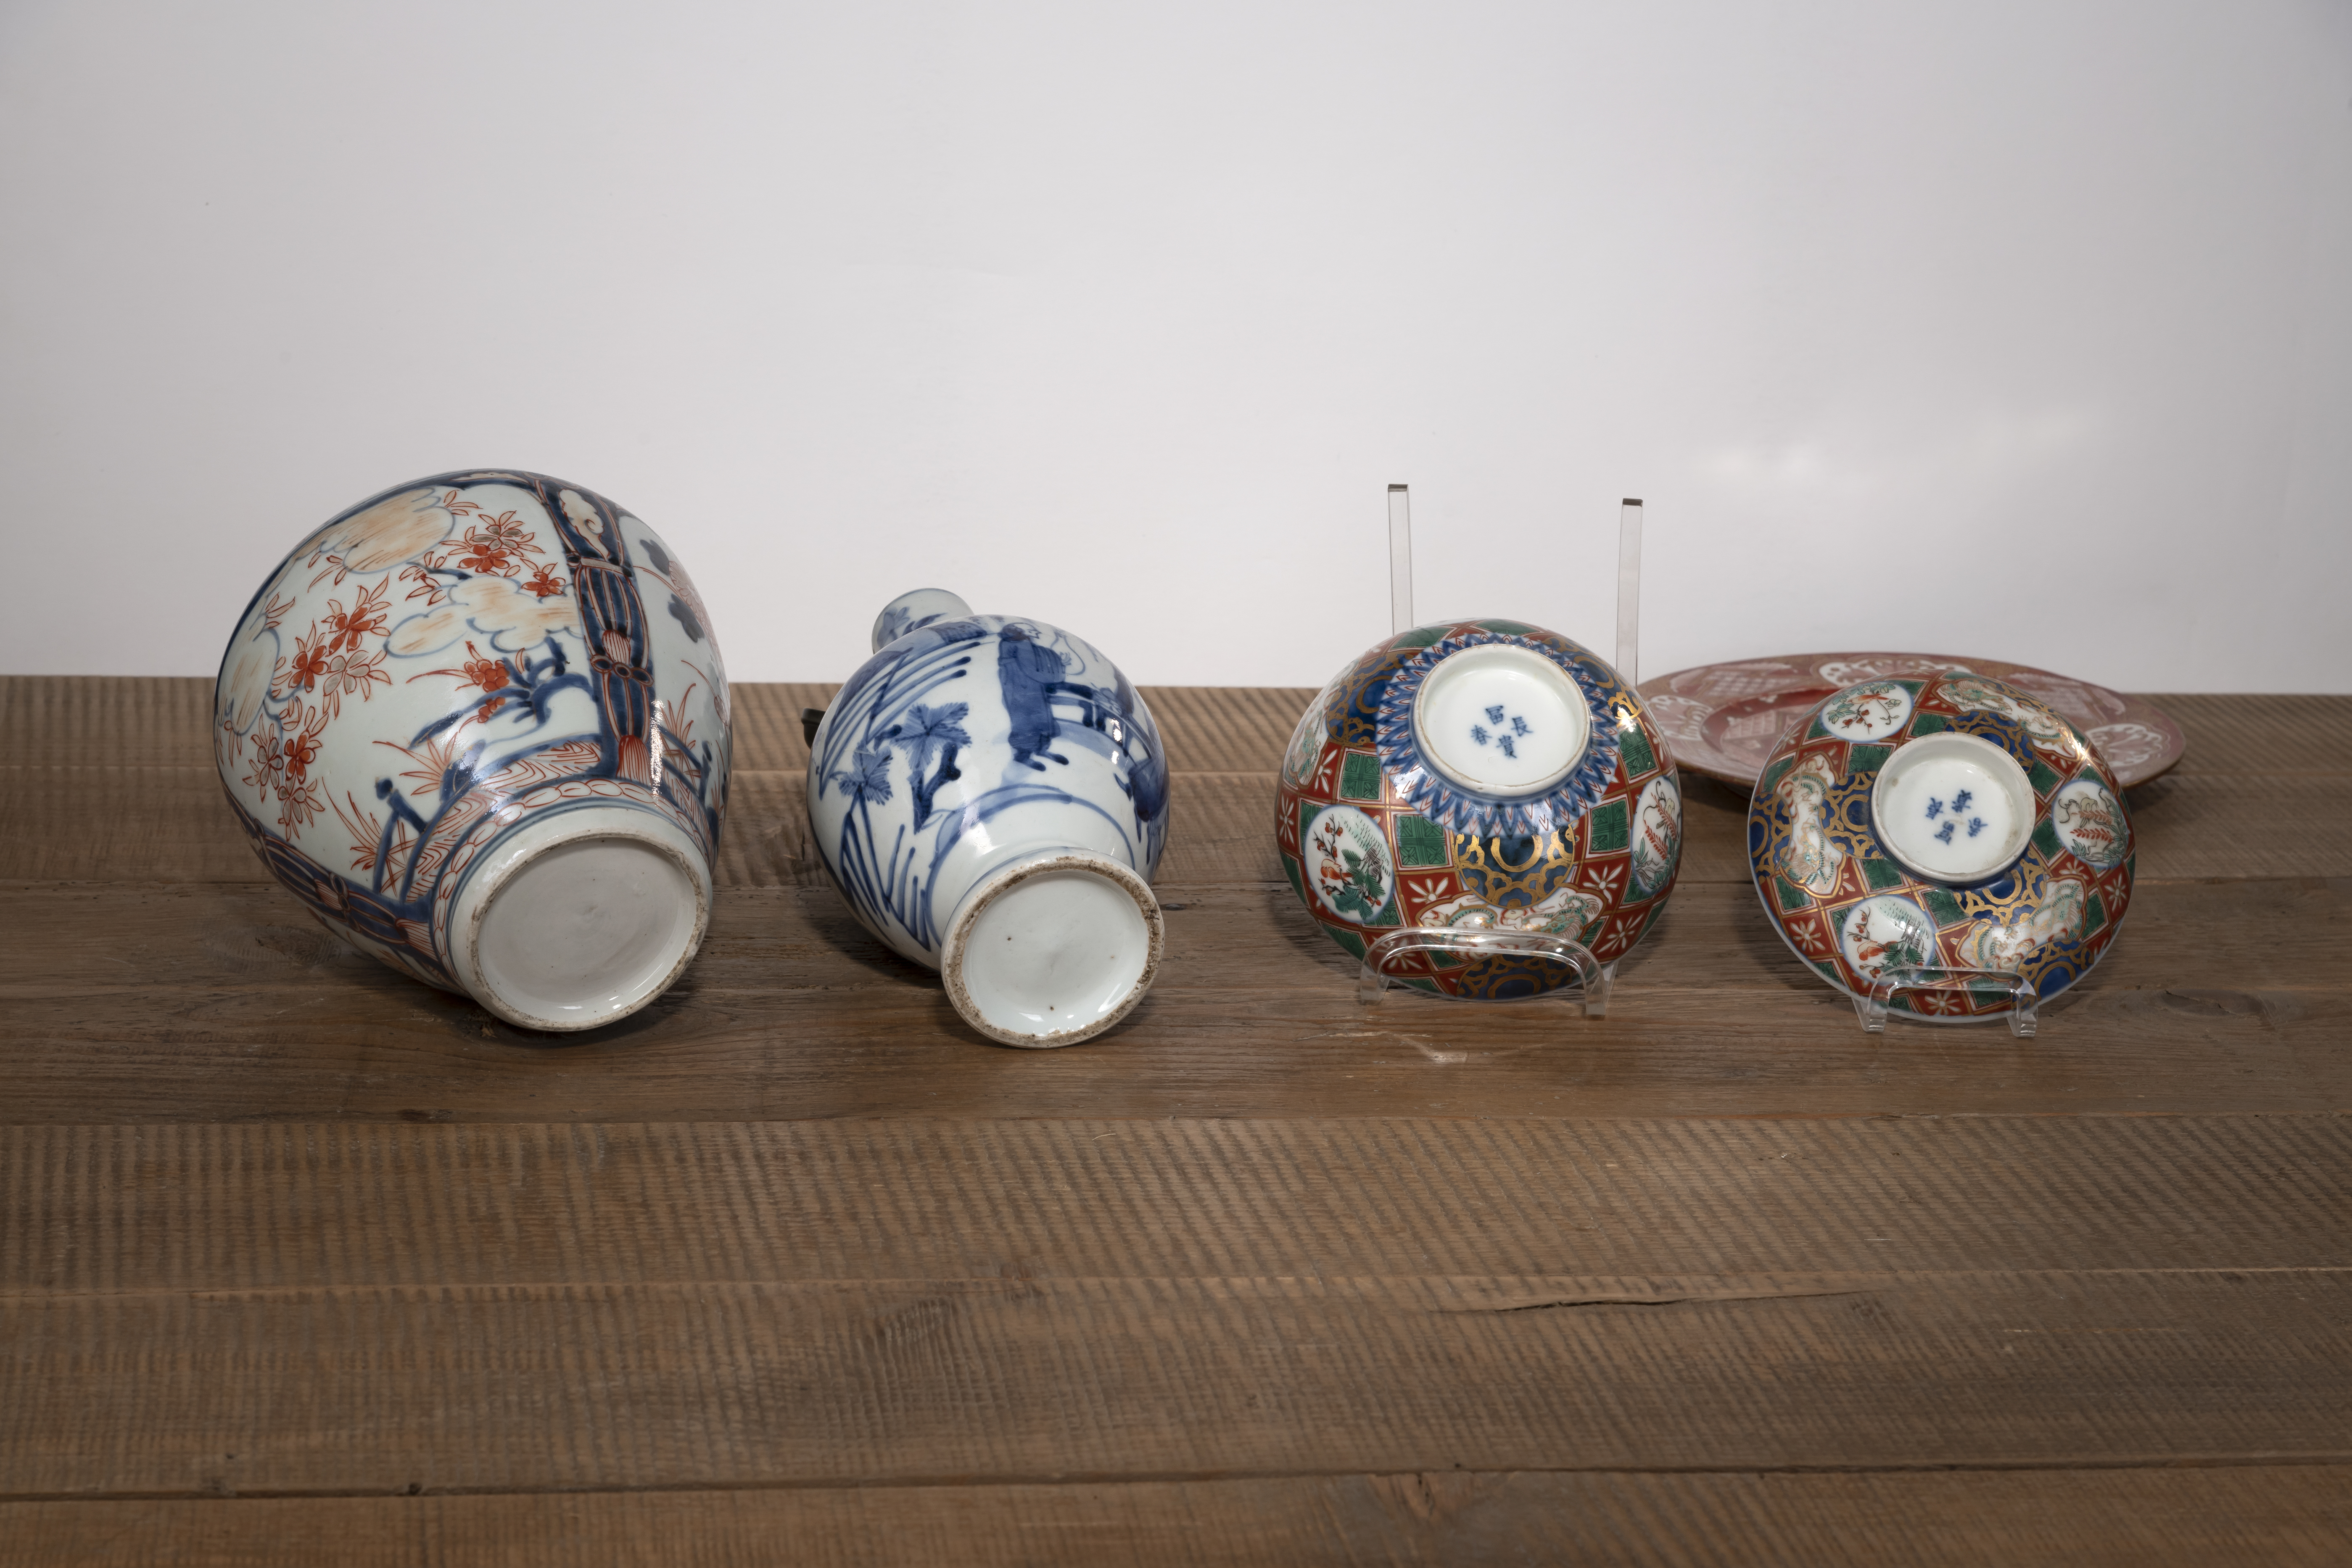 AN 'IMARI' BOWL AND COVER, A VASE, A 'KUTANI' DISH, AND AN 'ARITA' BLUE AND WHITE PORCELAIN EWER - Image 5 of 5